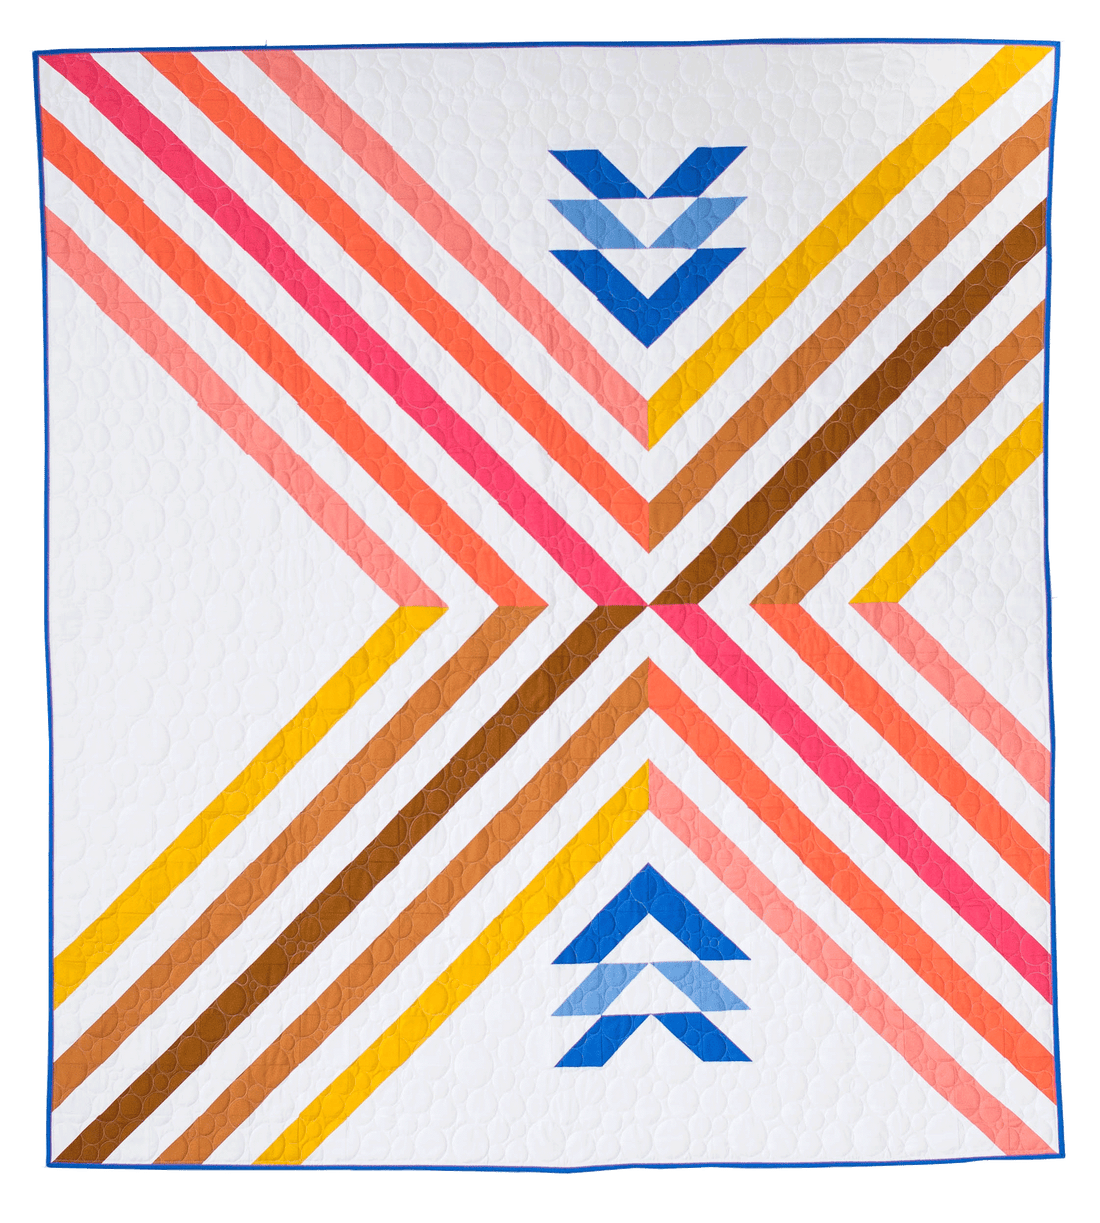 The Stripe Crossing Quilt